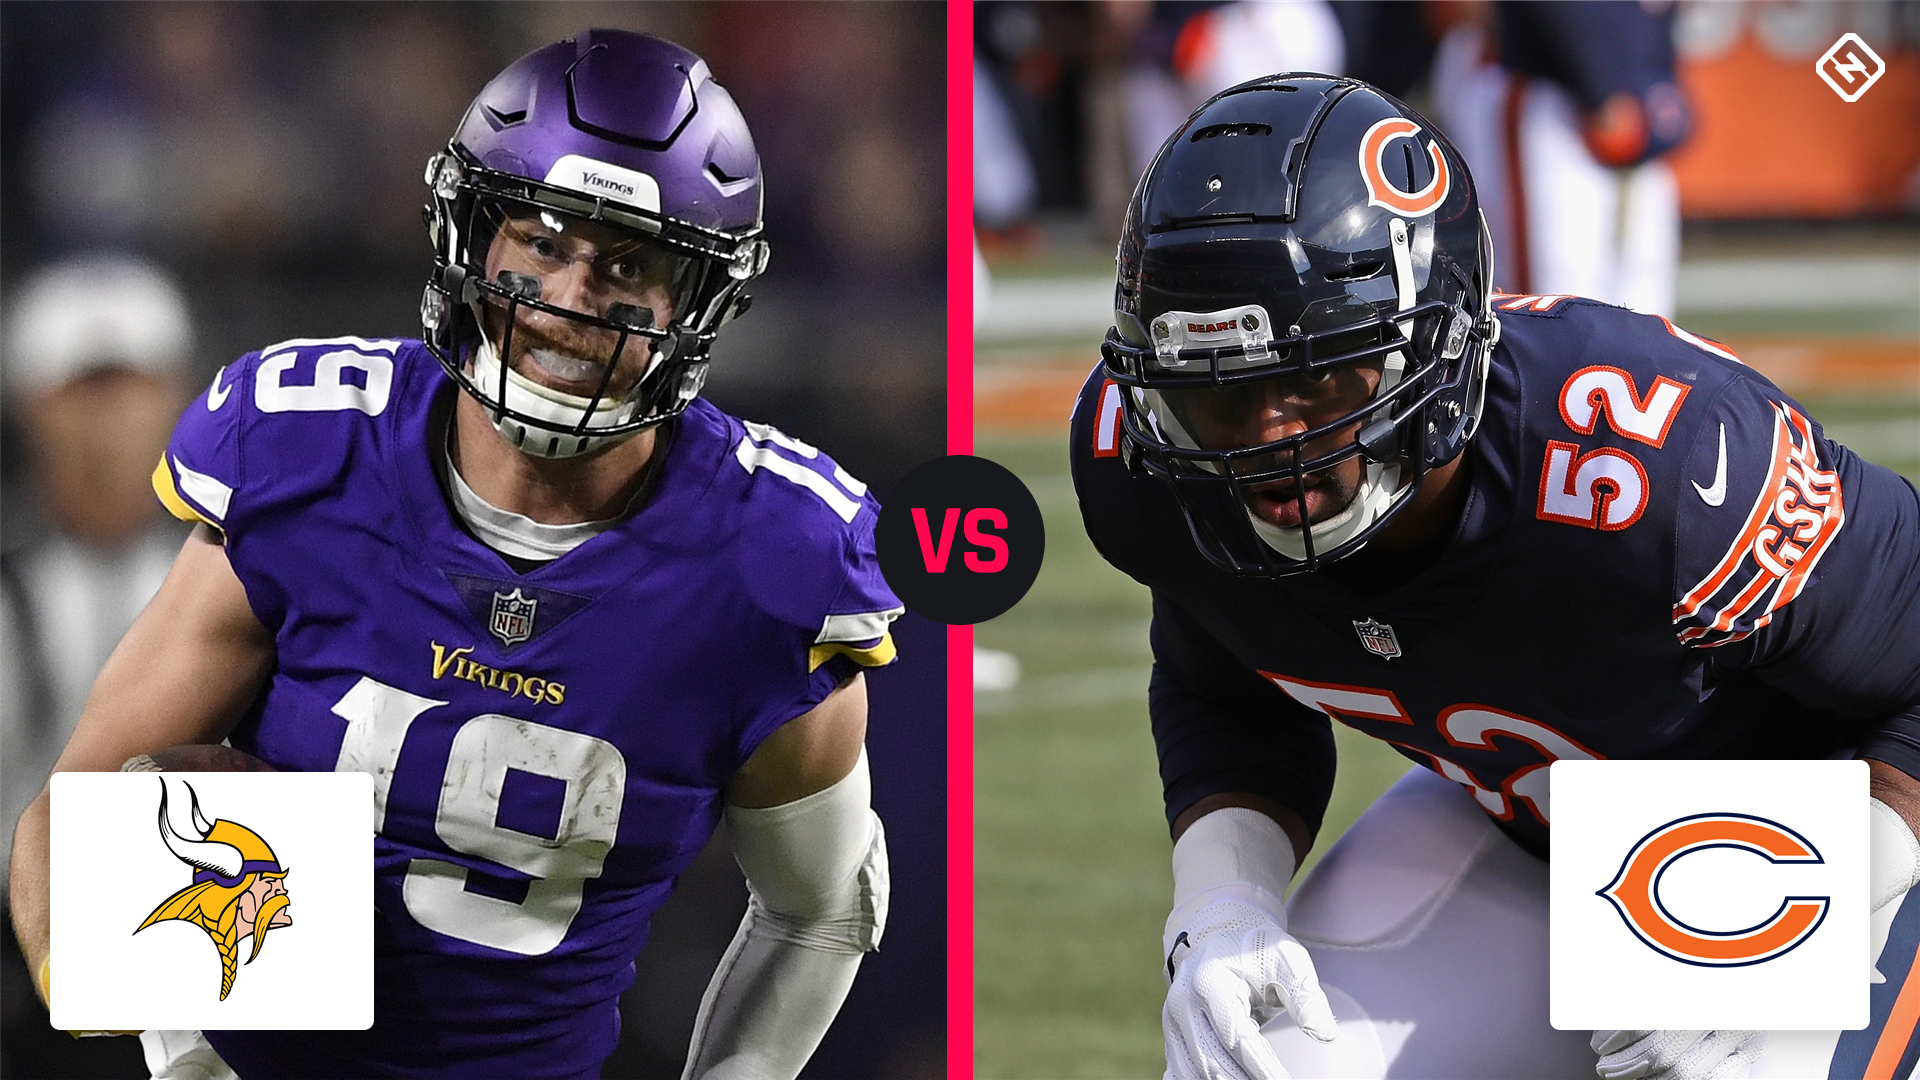 Vikings Bears rumors, news and stories [Top latest 20+ articles]